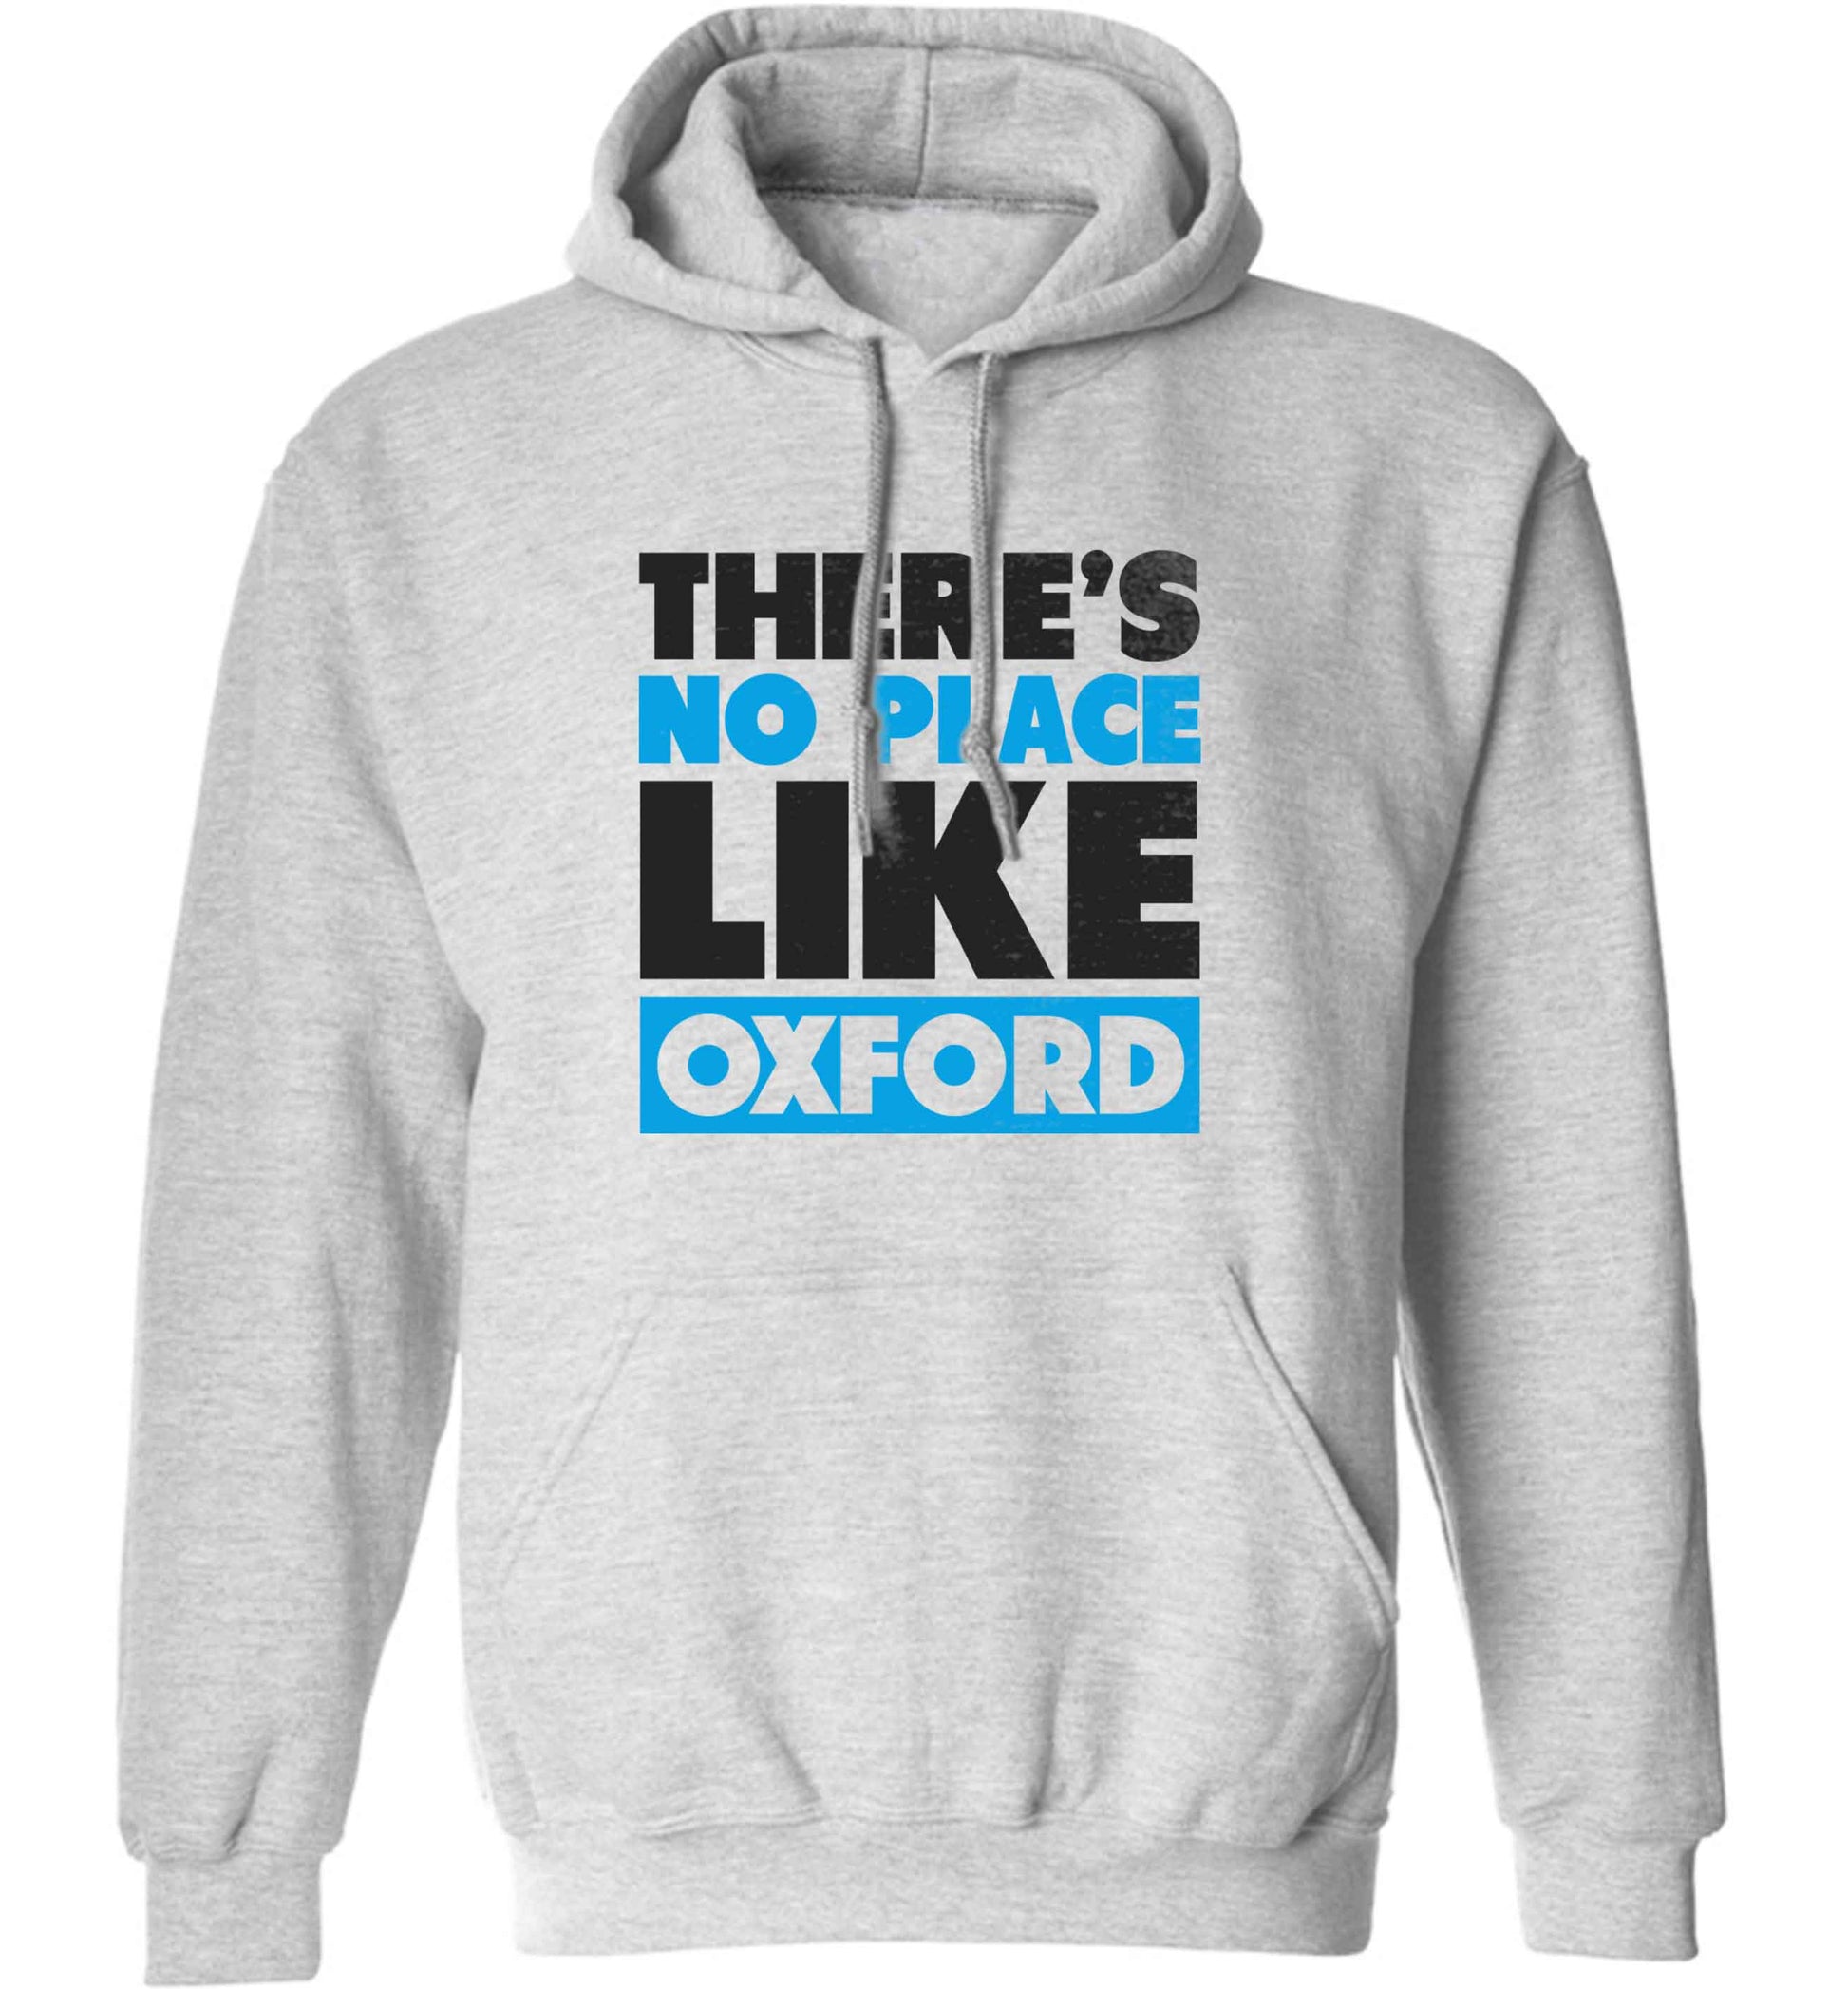 There's no place like Oxford adults unisex grey hoodie 2XL